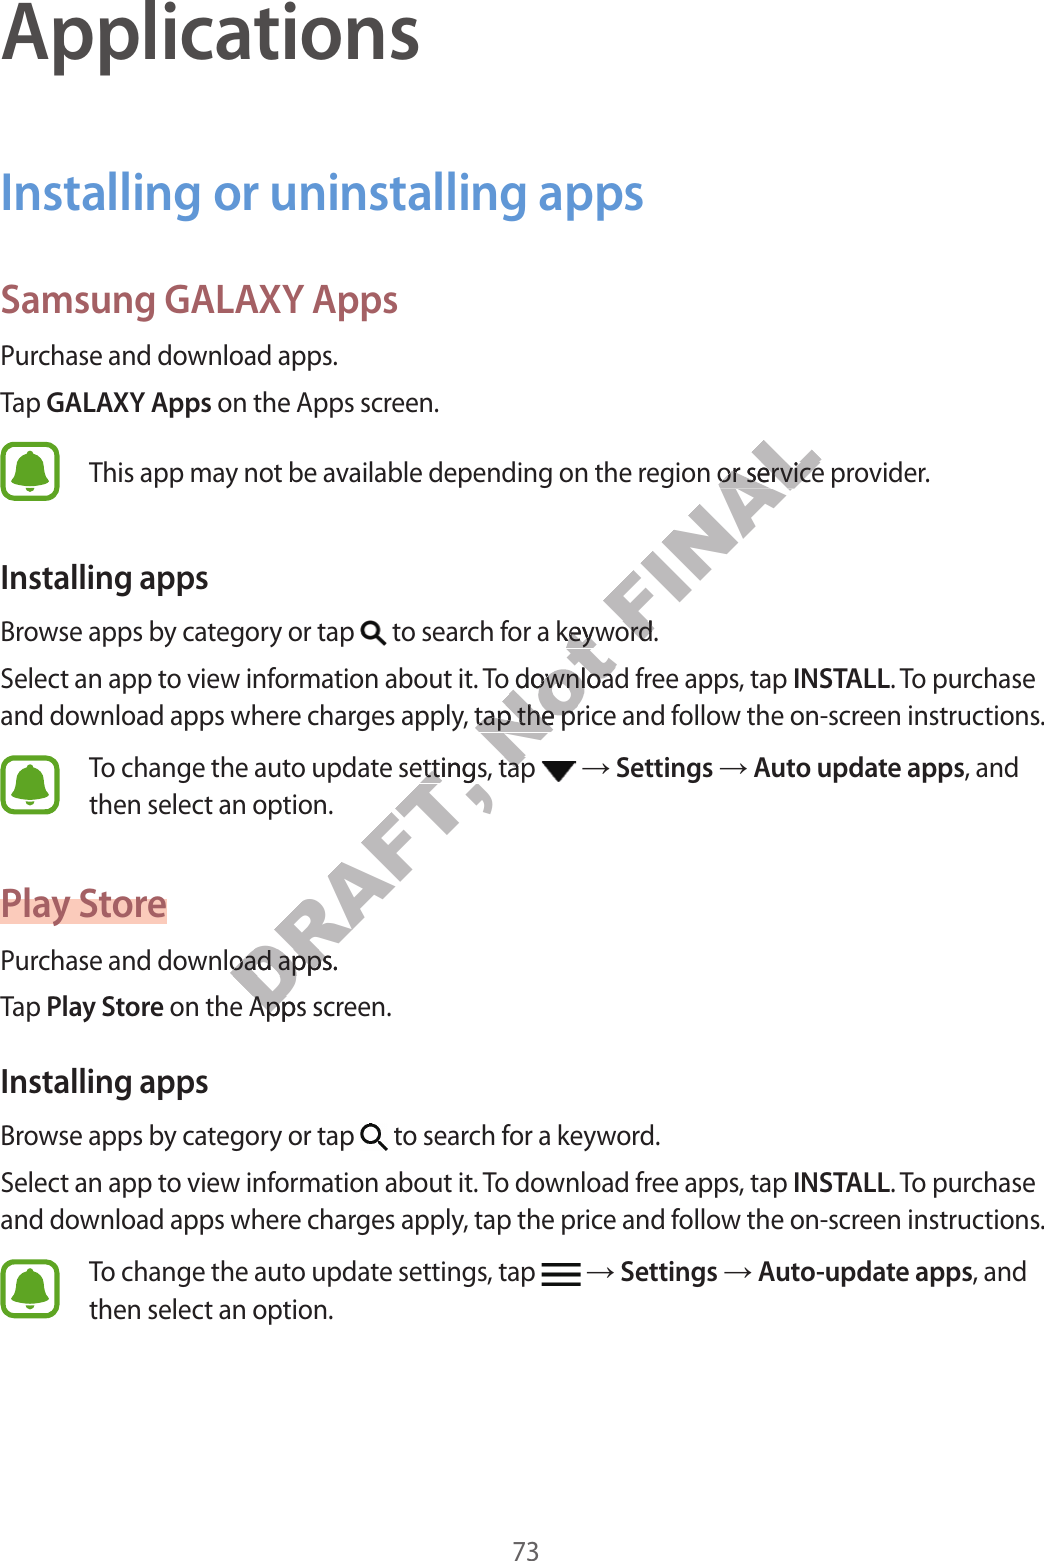 73ApplicationsInstalling or uninstalling appsSamsung GALAXY AppsPurchase and download apps.Tap GALAXY Apps on the Apps screen.This app may not be available depending on the region or service provider.Installing appsBrowse apps by category or tap   to search for a keyword.Select an app to view information about it. To download free apps, tap INSTALL. To purchase and download apps where charges apply, tap the price and follow the on-screen instructions.To change the auto update settings, tap    Settings  Auto update apps, and then select an option.Play StorePurchase and download apps.Tap Play Store on the Apps screen.Installing appsBrowse apps by category or tap   to search for a keyword.Select an app to view information about it. To download free apps, tap INSTALL. To purchase and download apps where charges apply, tap the price and follow the on-screen instructions.To change the auto update settings, tap    Settings  Auto-update apps, and then select an option.DRAFT, e settings, tap e settingswnload apps.wnload appsDRAFT,  on the Apps scr on the Apps scrNot or a keywor a keyw. To download fr. To download frges apply, tap the prges apply, tap the pre settings, tap e settings, tap FINALion or service prion or service prword.word.